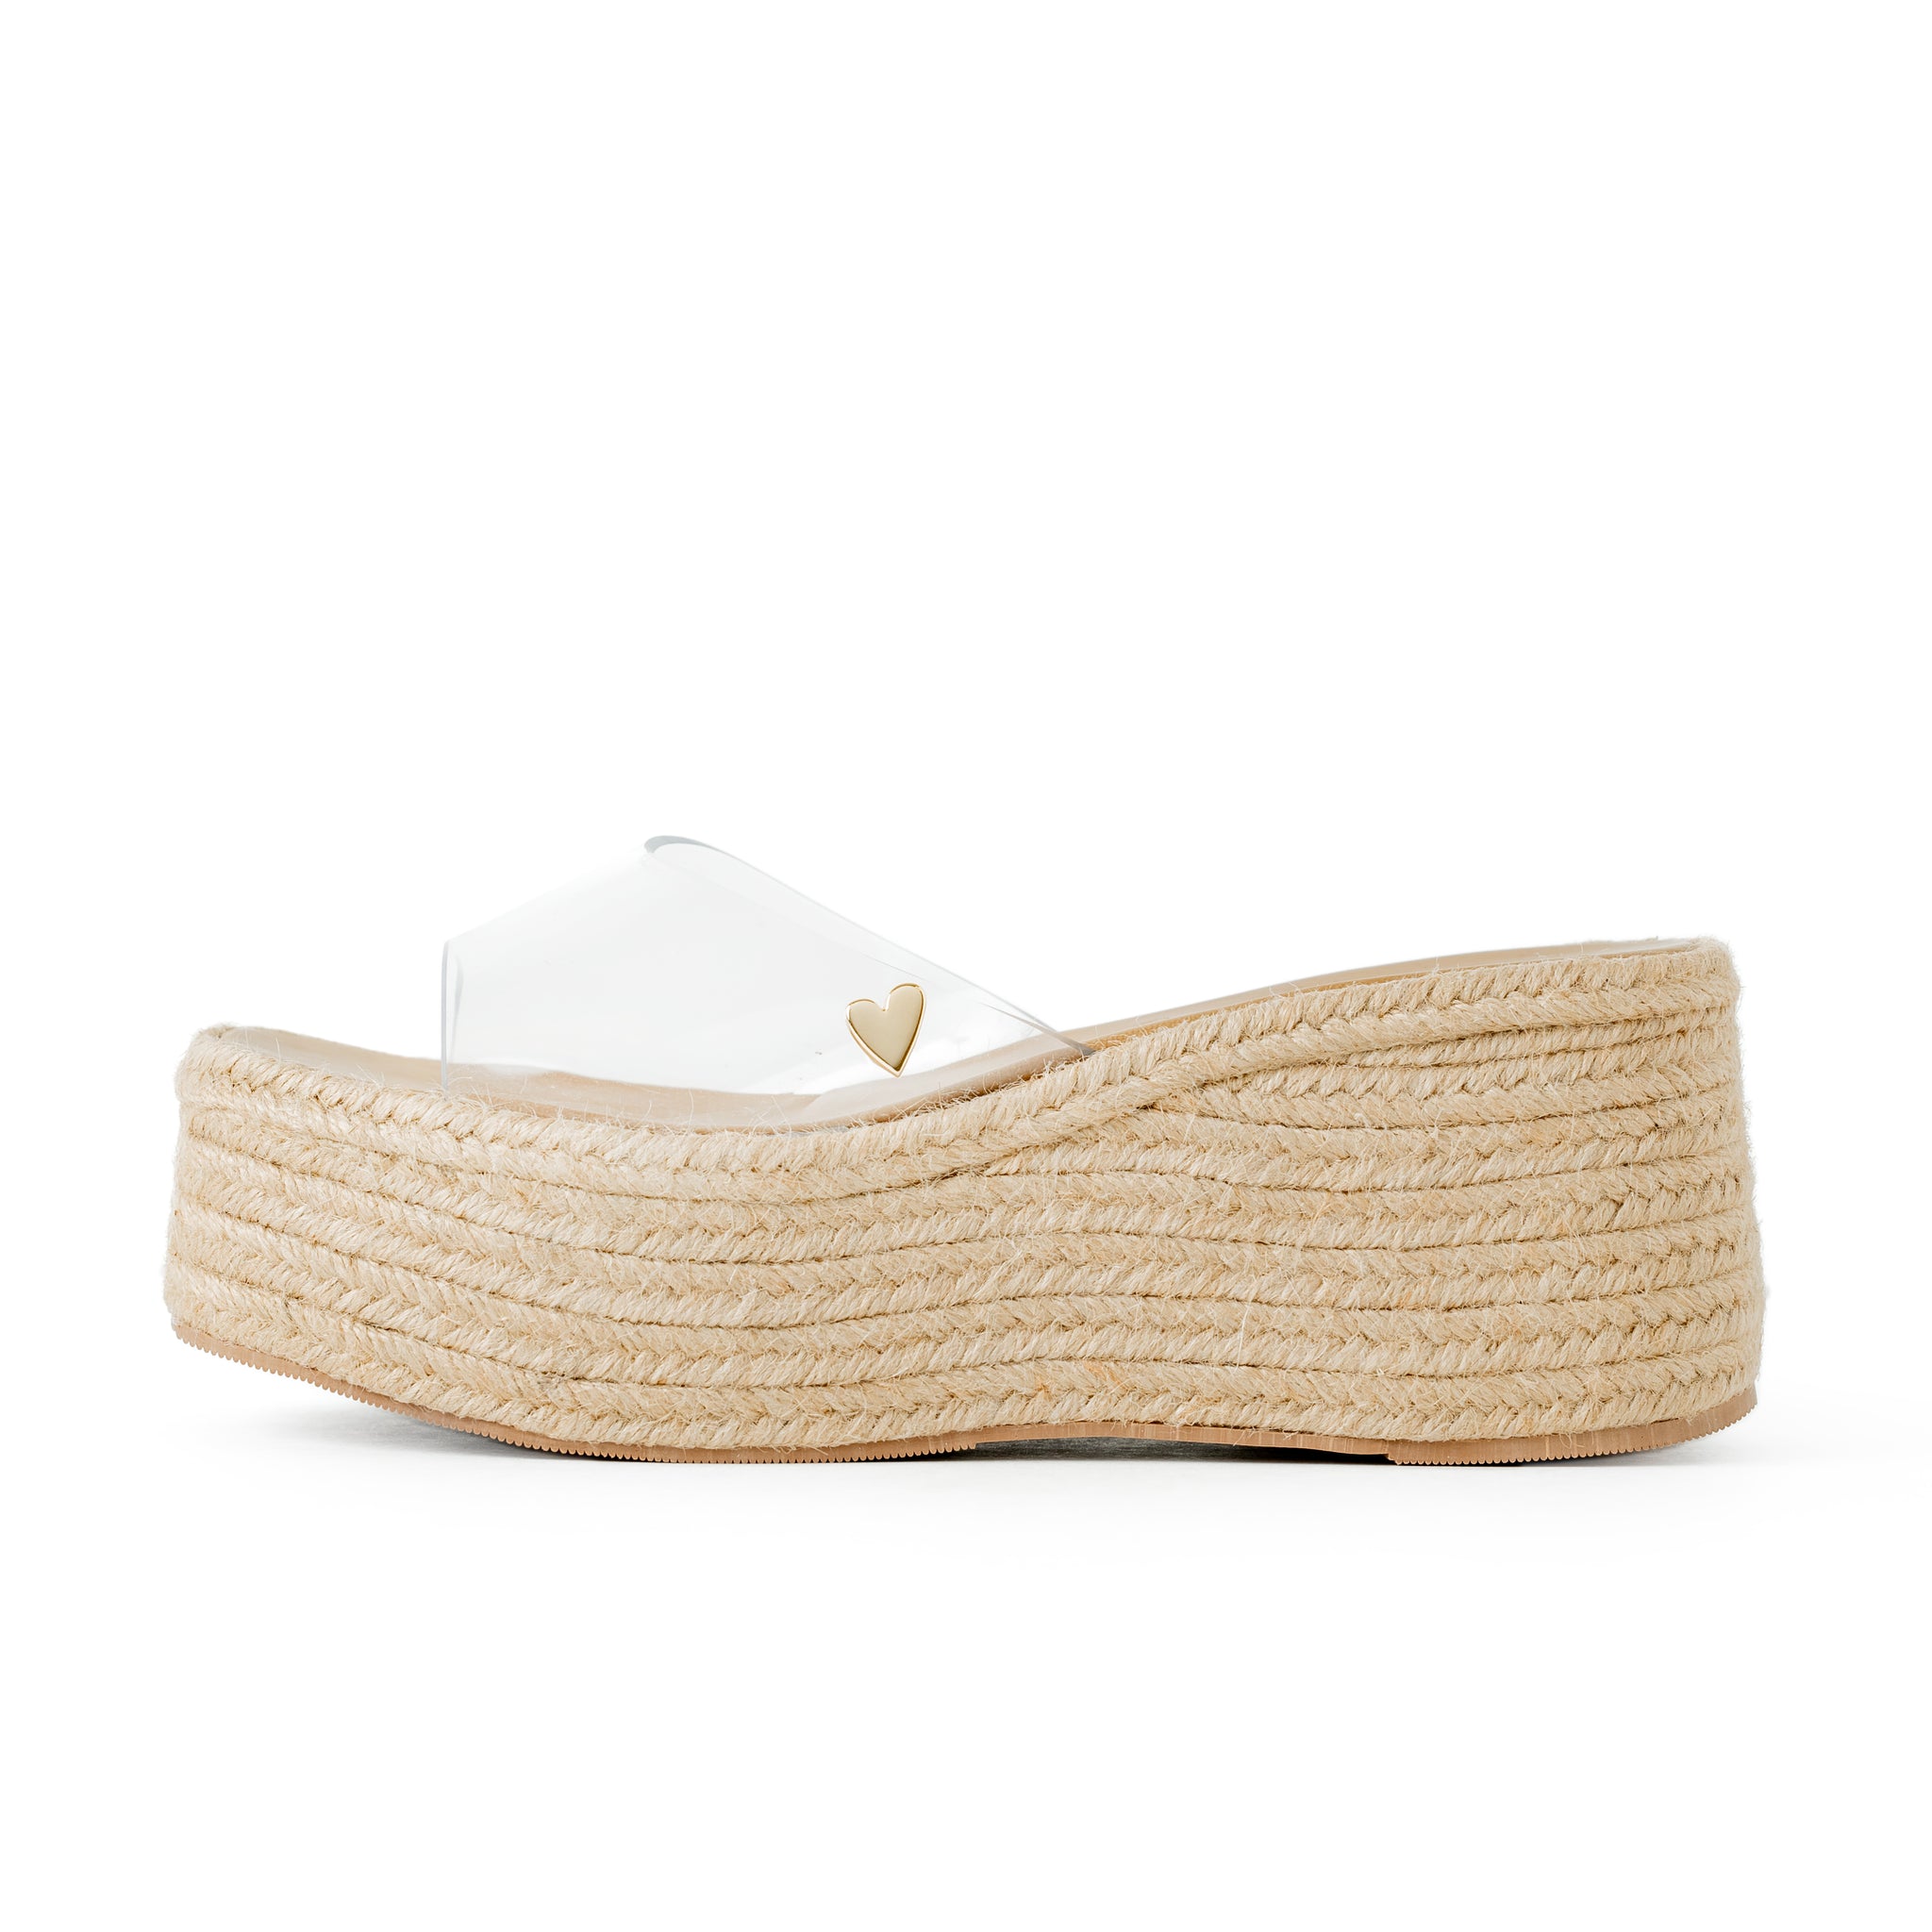 Emma Espadrilles by Nataly Mendez FEATURES Squared tip Vinyl upper material Genuine leather insole lining Flexible rubber sole Handmade 2.8 inch high heel 1.9 inch platform